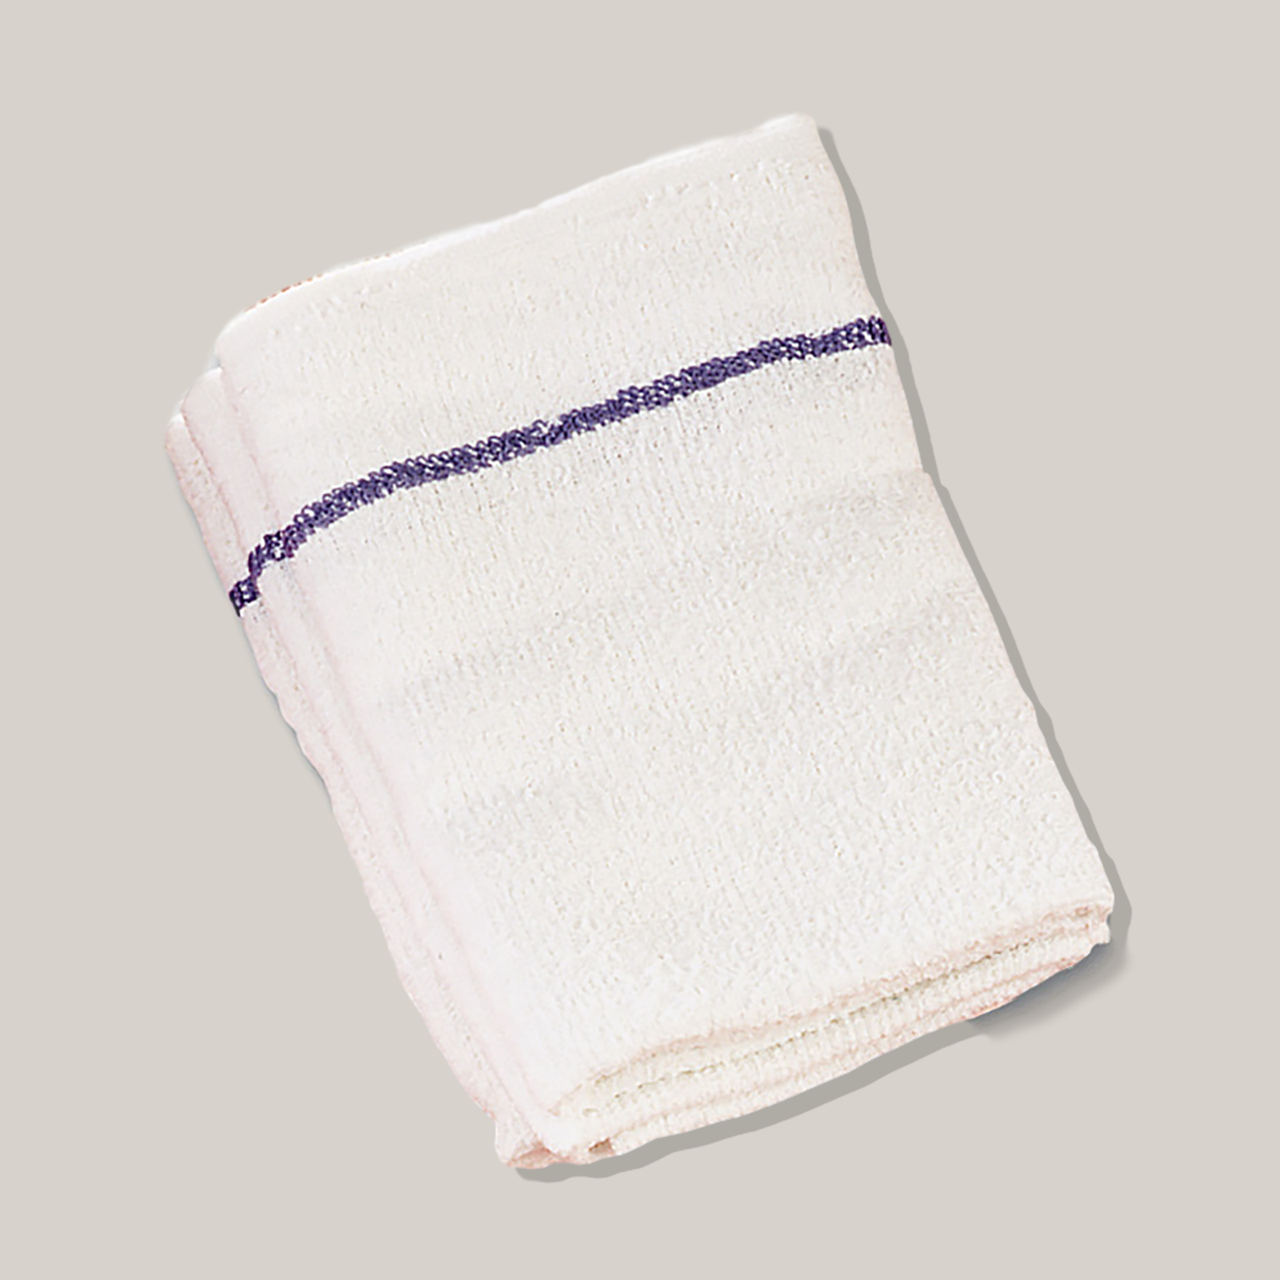 Dannyco (12/pk) White Towels With gray Line #TOWEL2C 